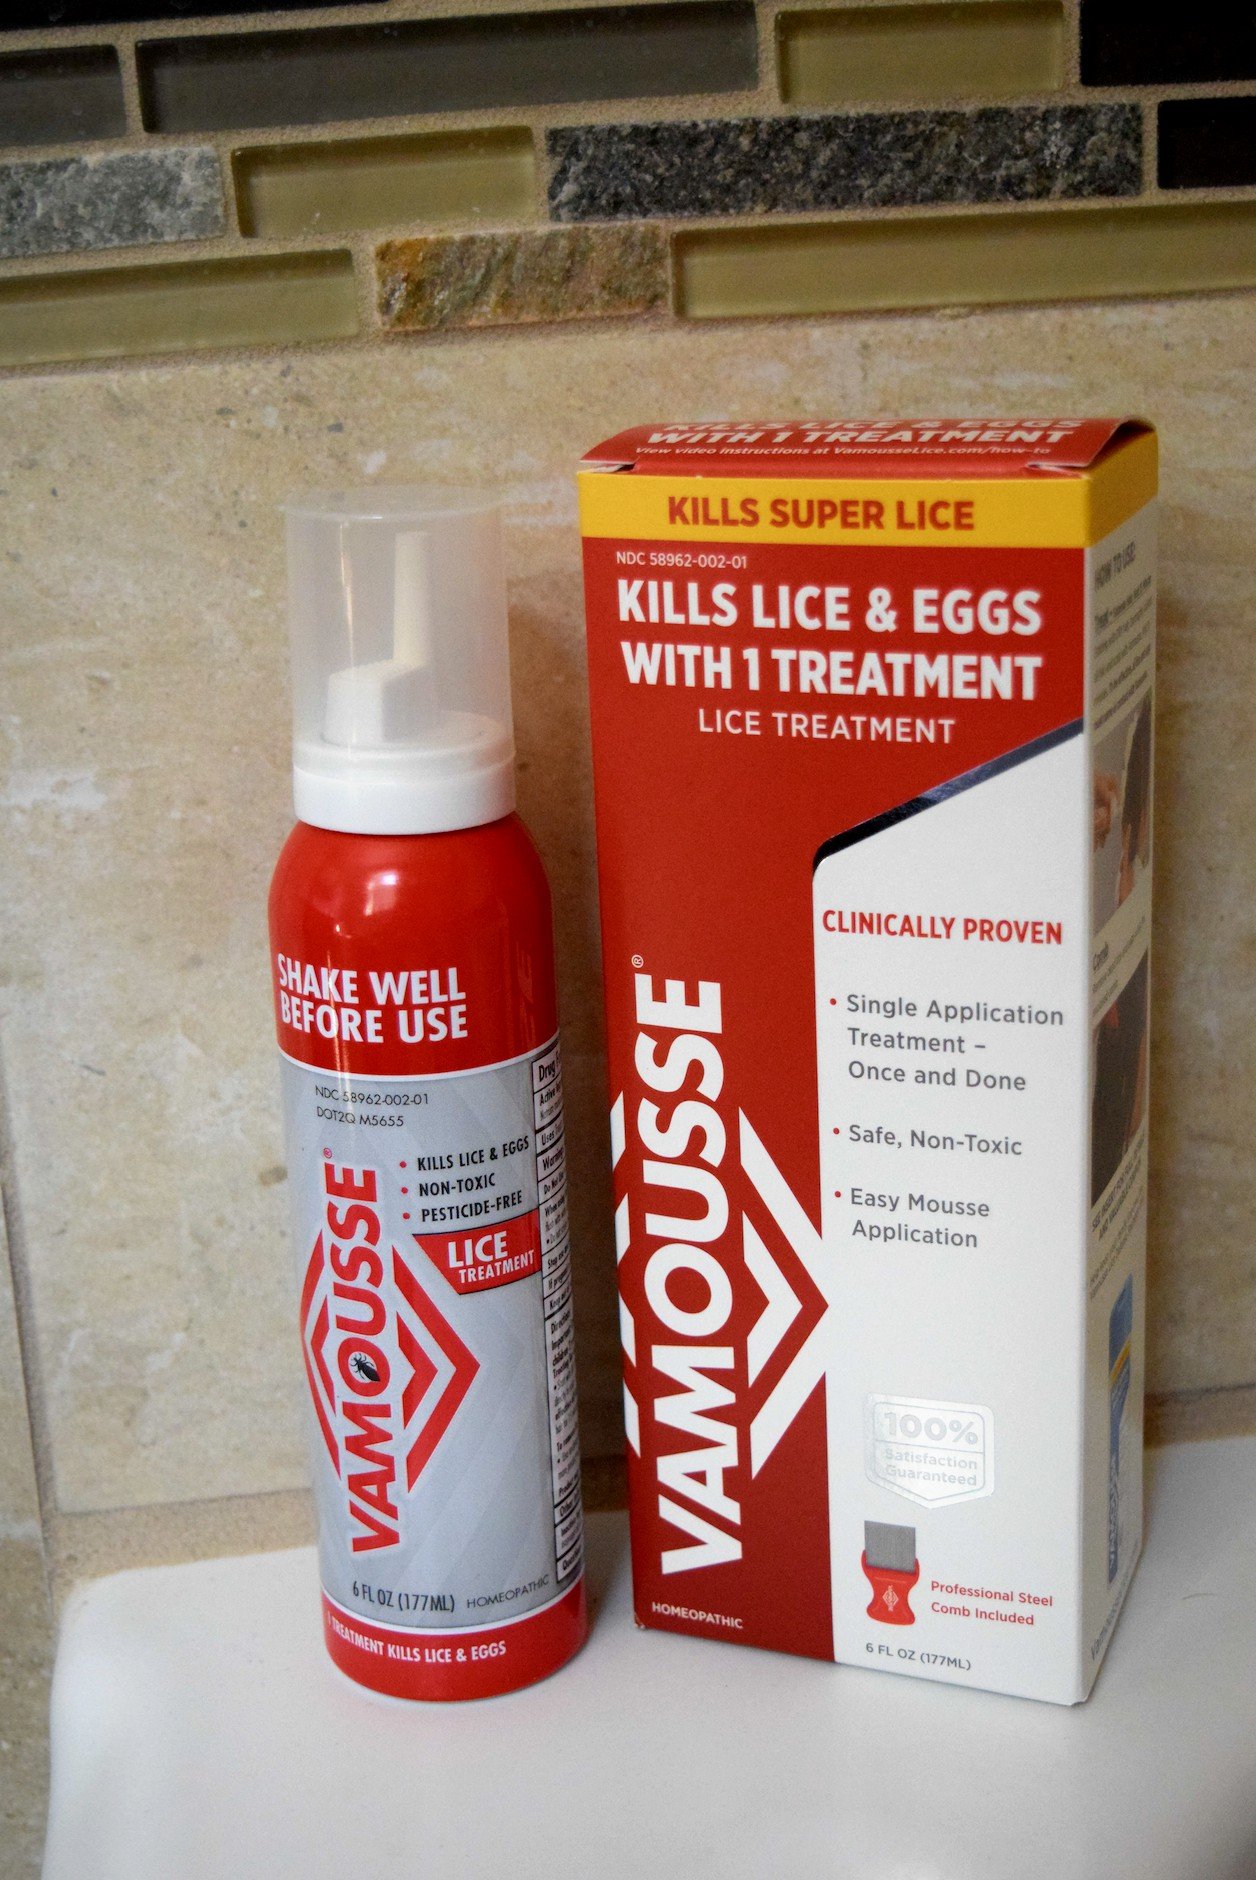 You don’t need a prescription for Vamousse Lice Treatment.  This product resolves the head lice situation with the first application – “one and done” – so you can get back to focusing on school and life, not the itchy effects of head lice.